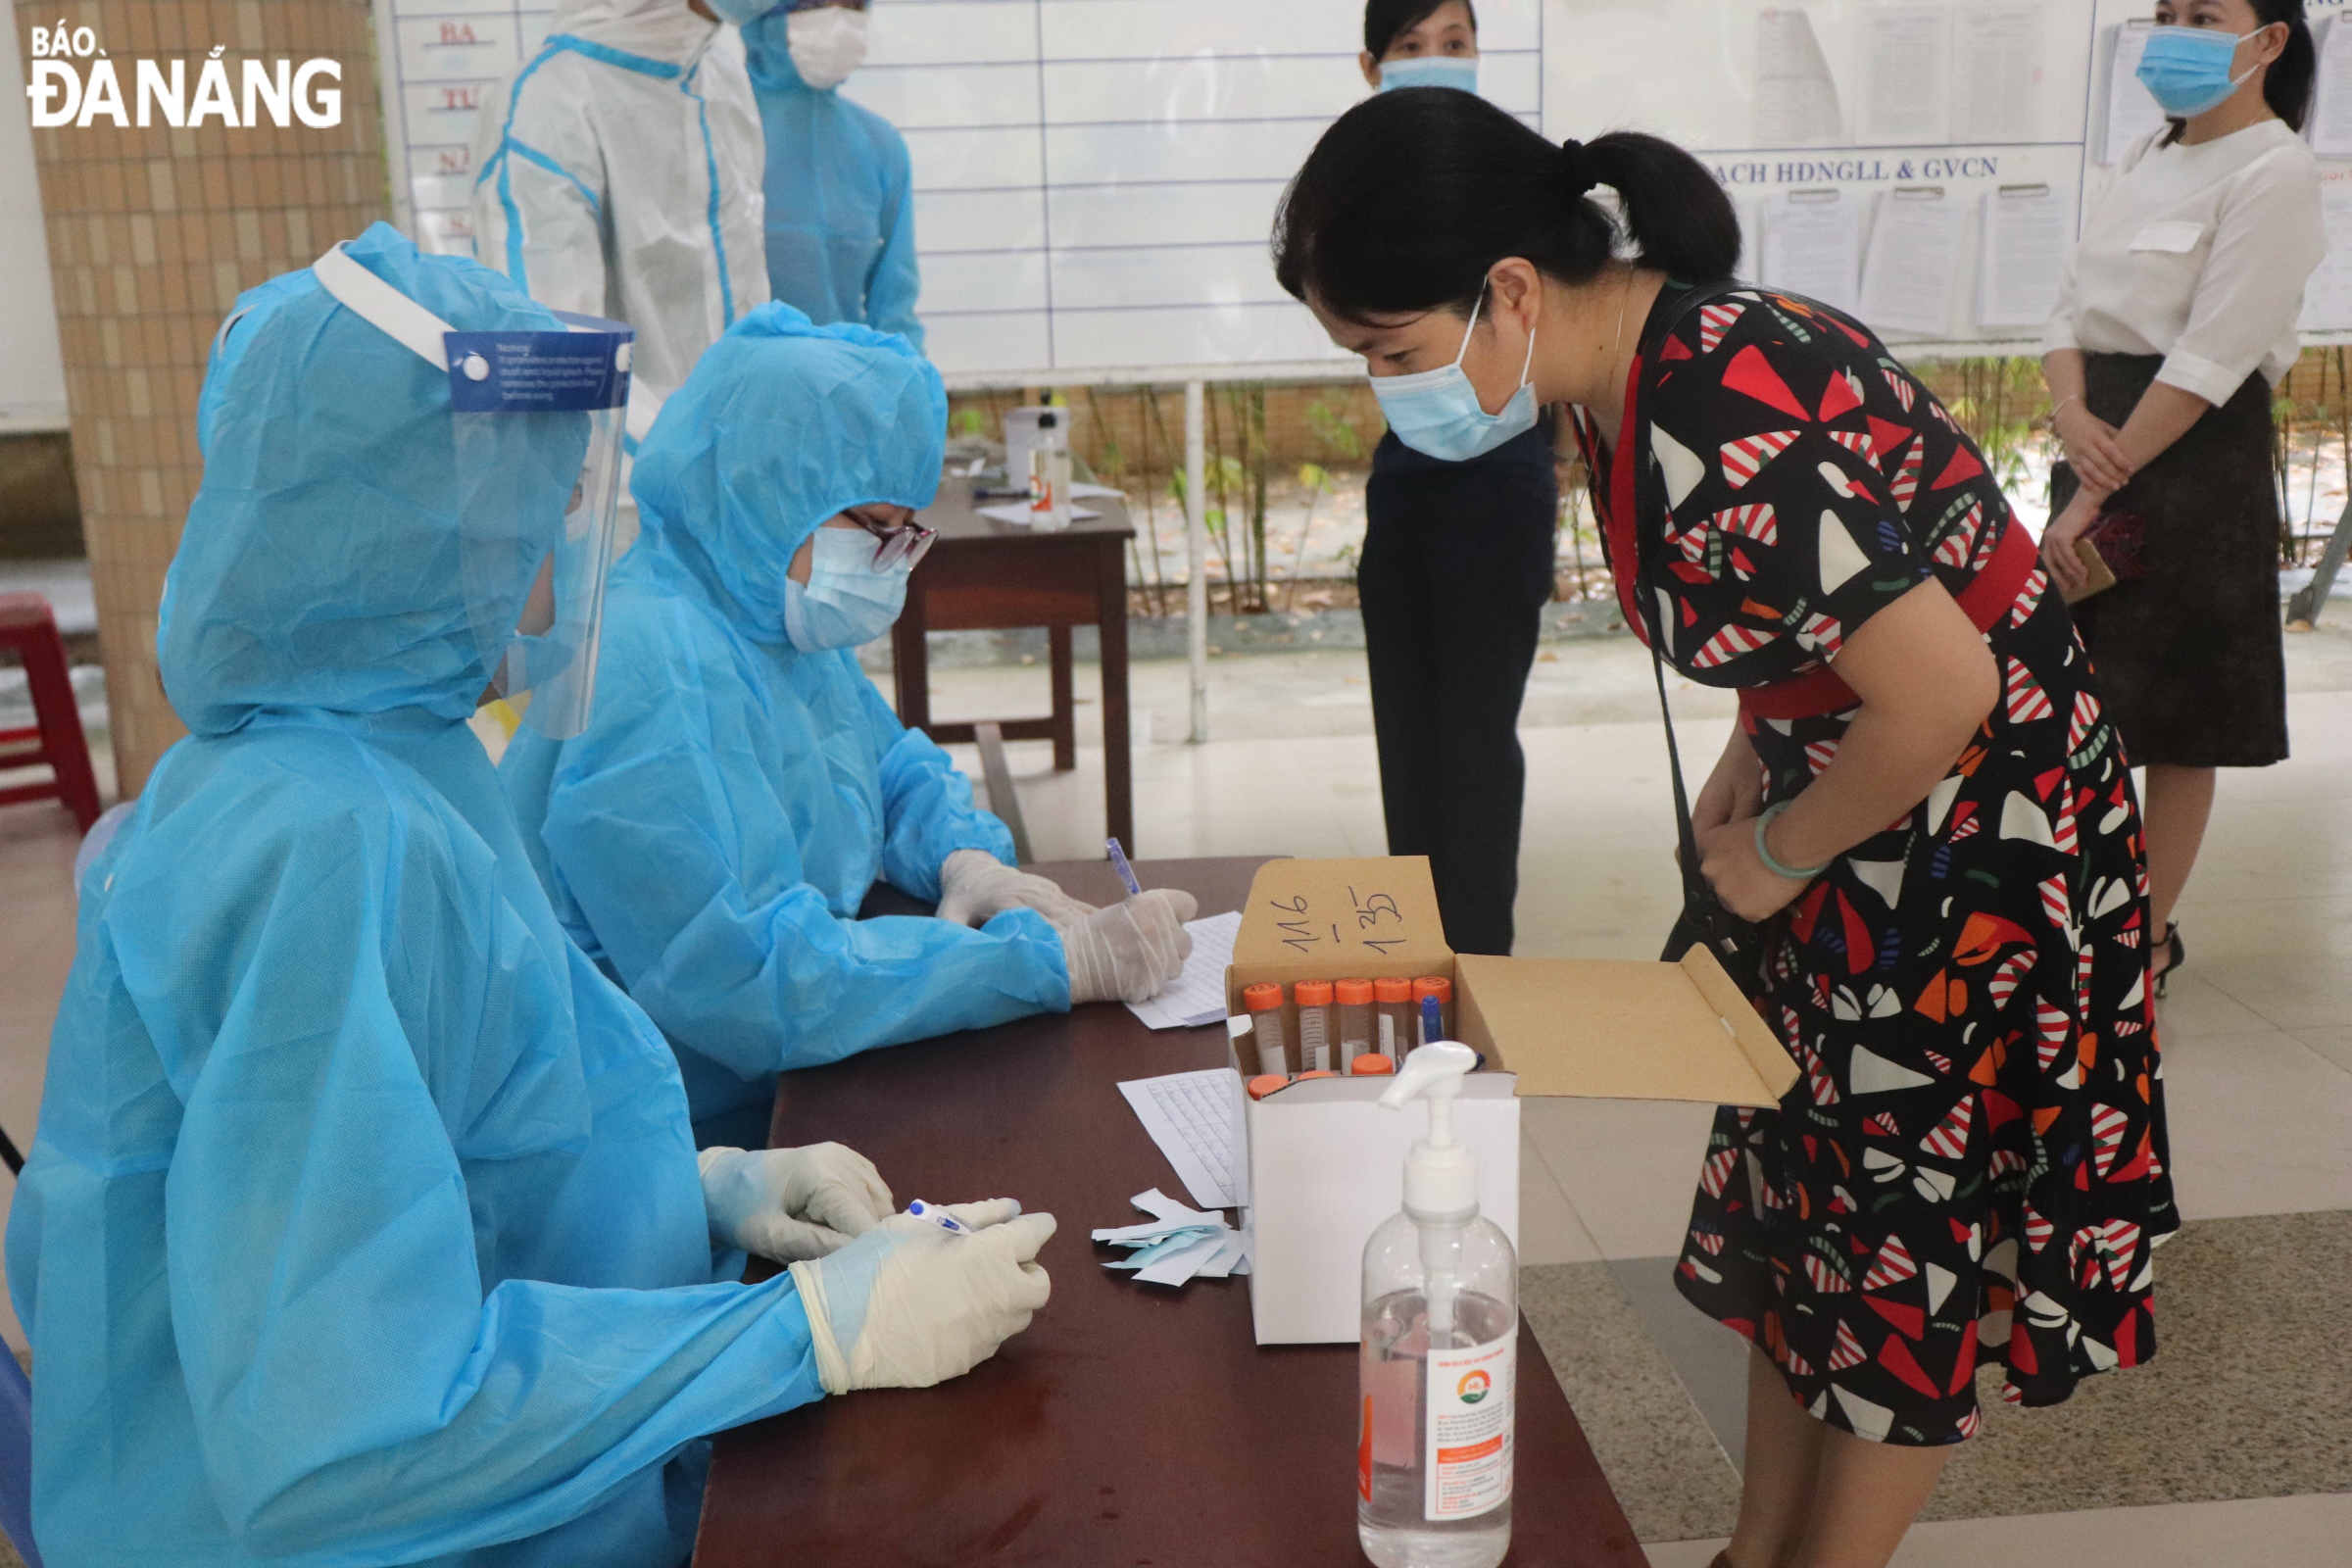 Medical workers collect personal information from those who get tested for COVID-19. Photo: NGOC HA